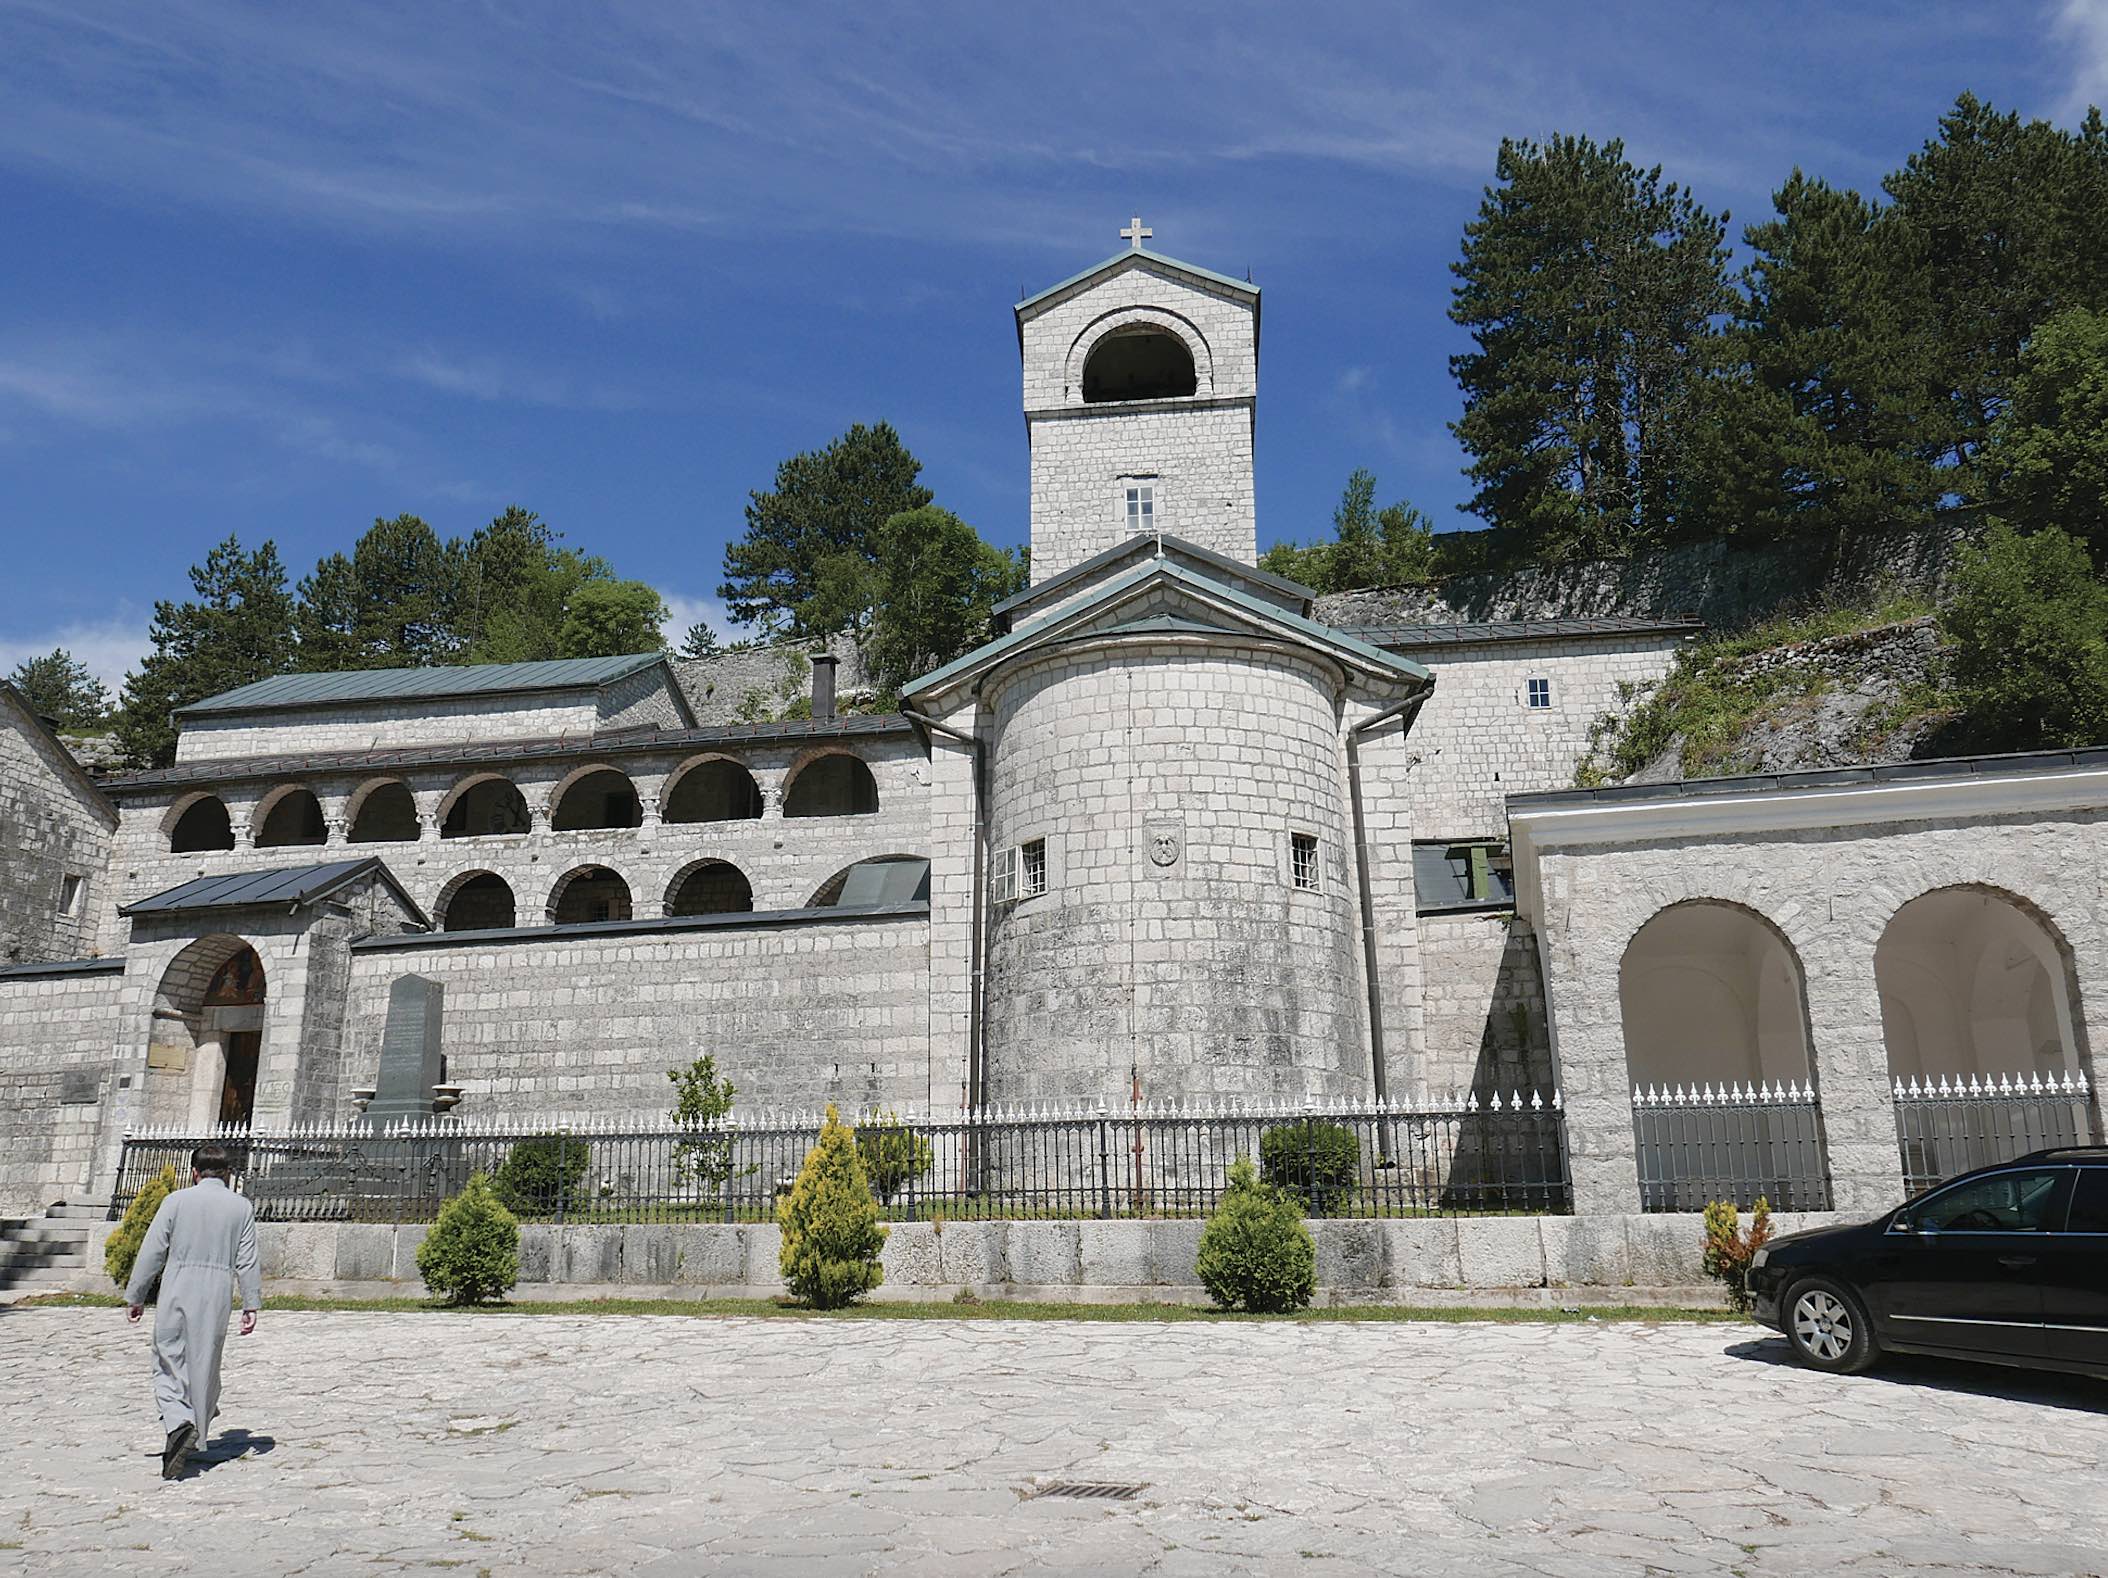 Monastery of Cetinje, Montenegro. The monastery holds an extraordinary collection of Church Slavonic manuscripts dating from the 13th century and later.